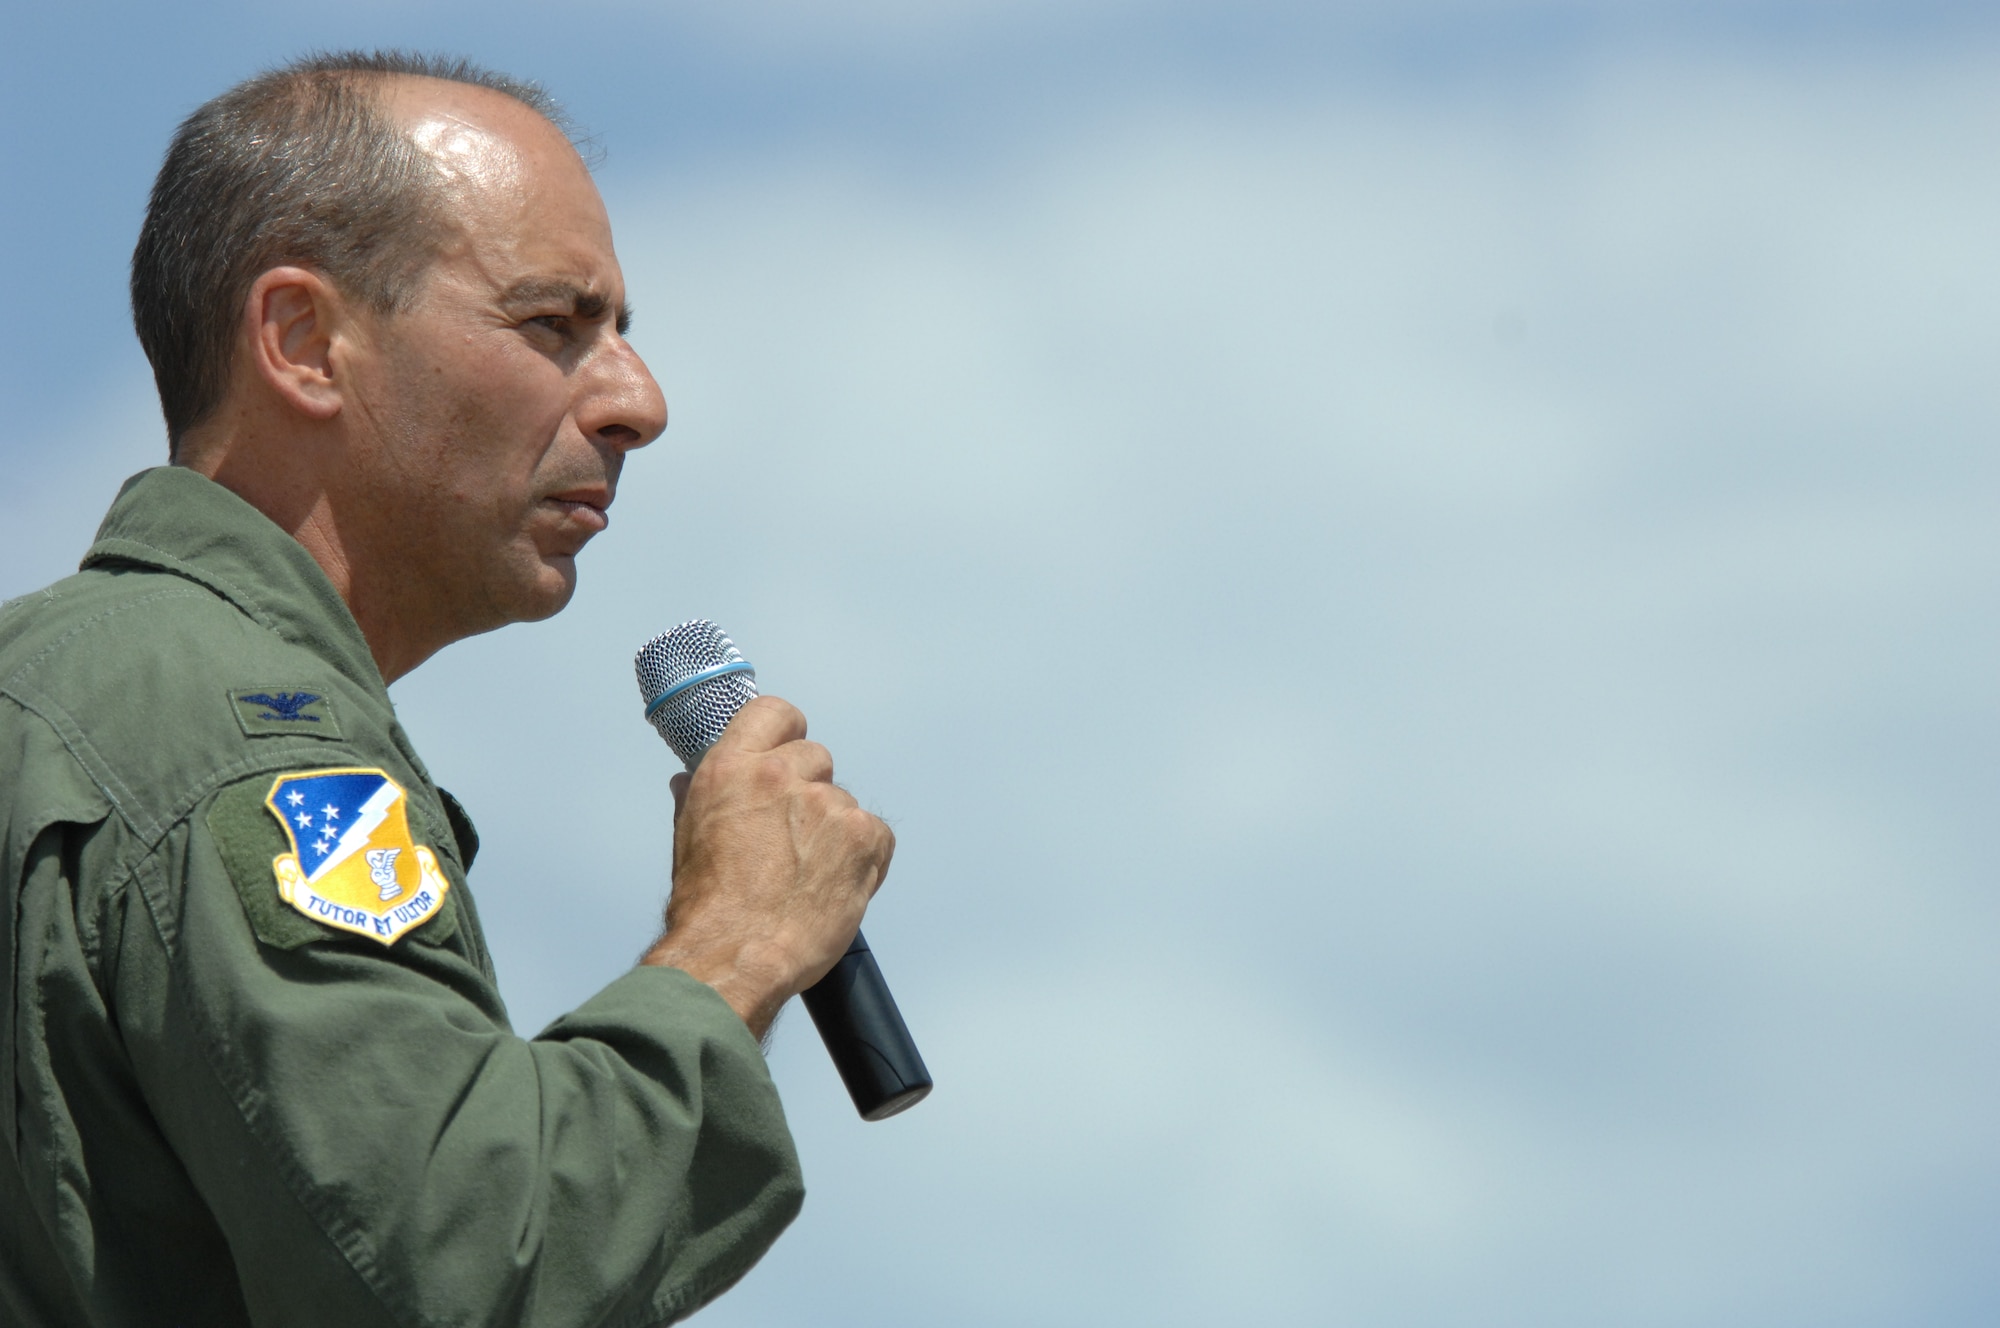 Col. Jeff "Cobra" Harrigian, 49th Fighter Wing commander, speaks about the 7th Fighter Squadron and the features of the F-22A Raptor on Holloman Air Force Base, N.M., June 2..The jet is one of the first two Holloman-tailed F-22s to arrive on base. Prior to landing, the jets flew over the Tularosa Basin, the community had the chance to witness the future of Holloman Air Force Base.

(U.S. Air Force photo/Senior Airman Anthony Nelson Jr)
